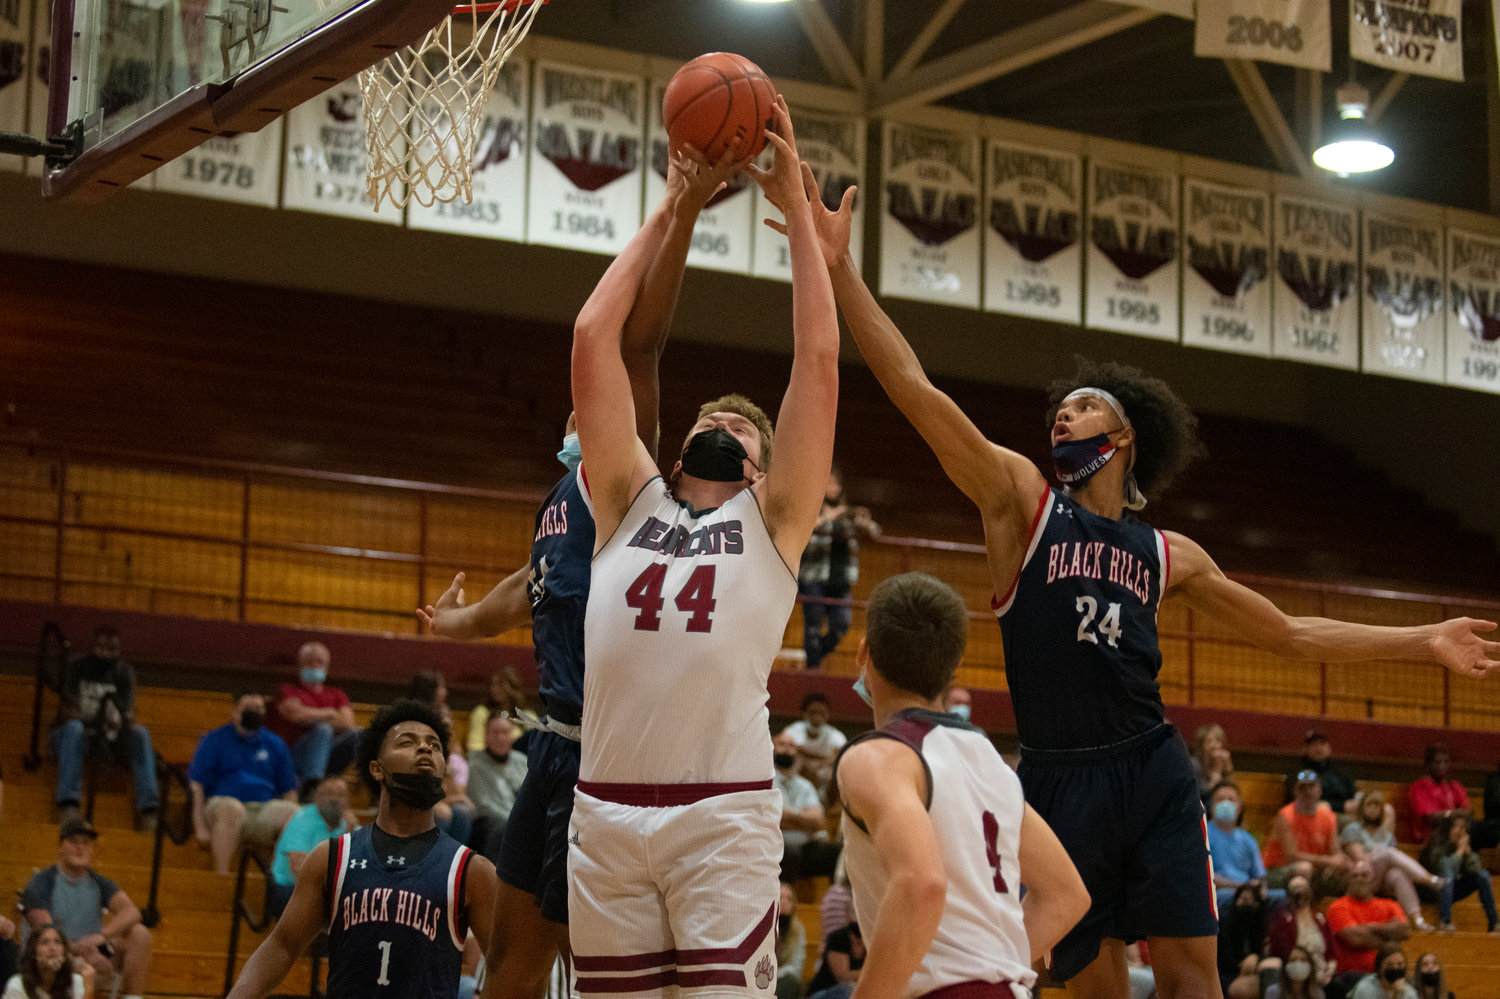 W.F. West sophomore Soren Dalan (44) grabs an offensive rebound against two Black Hills players on Friday.